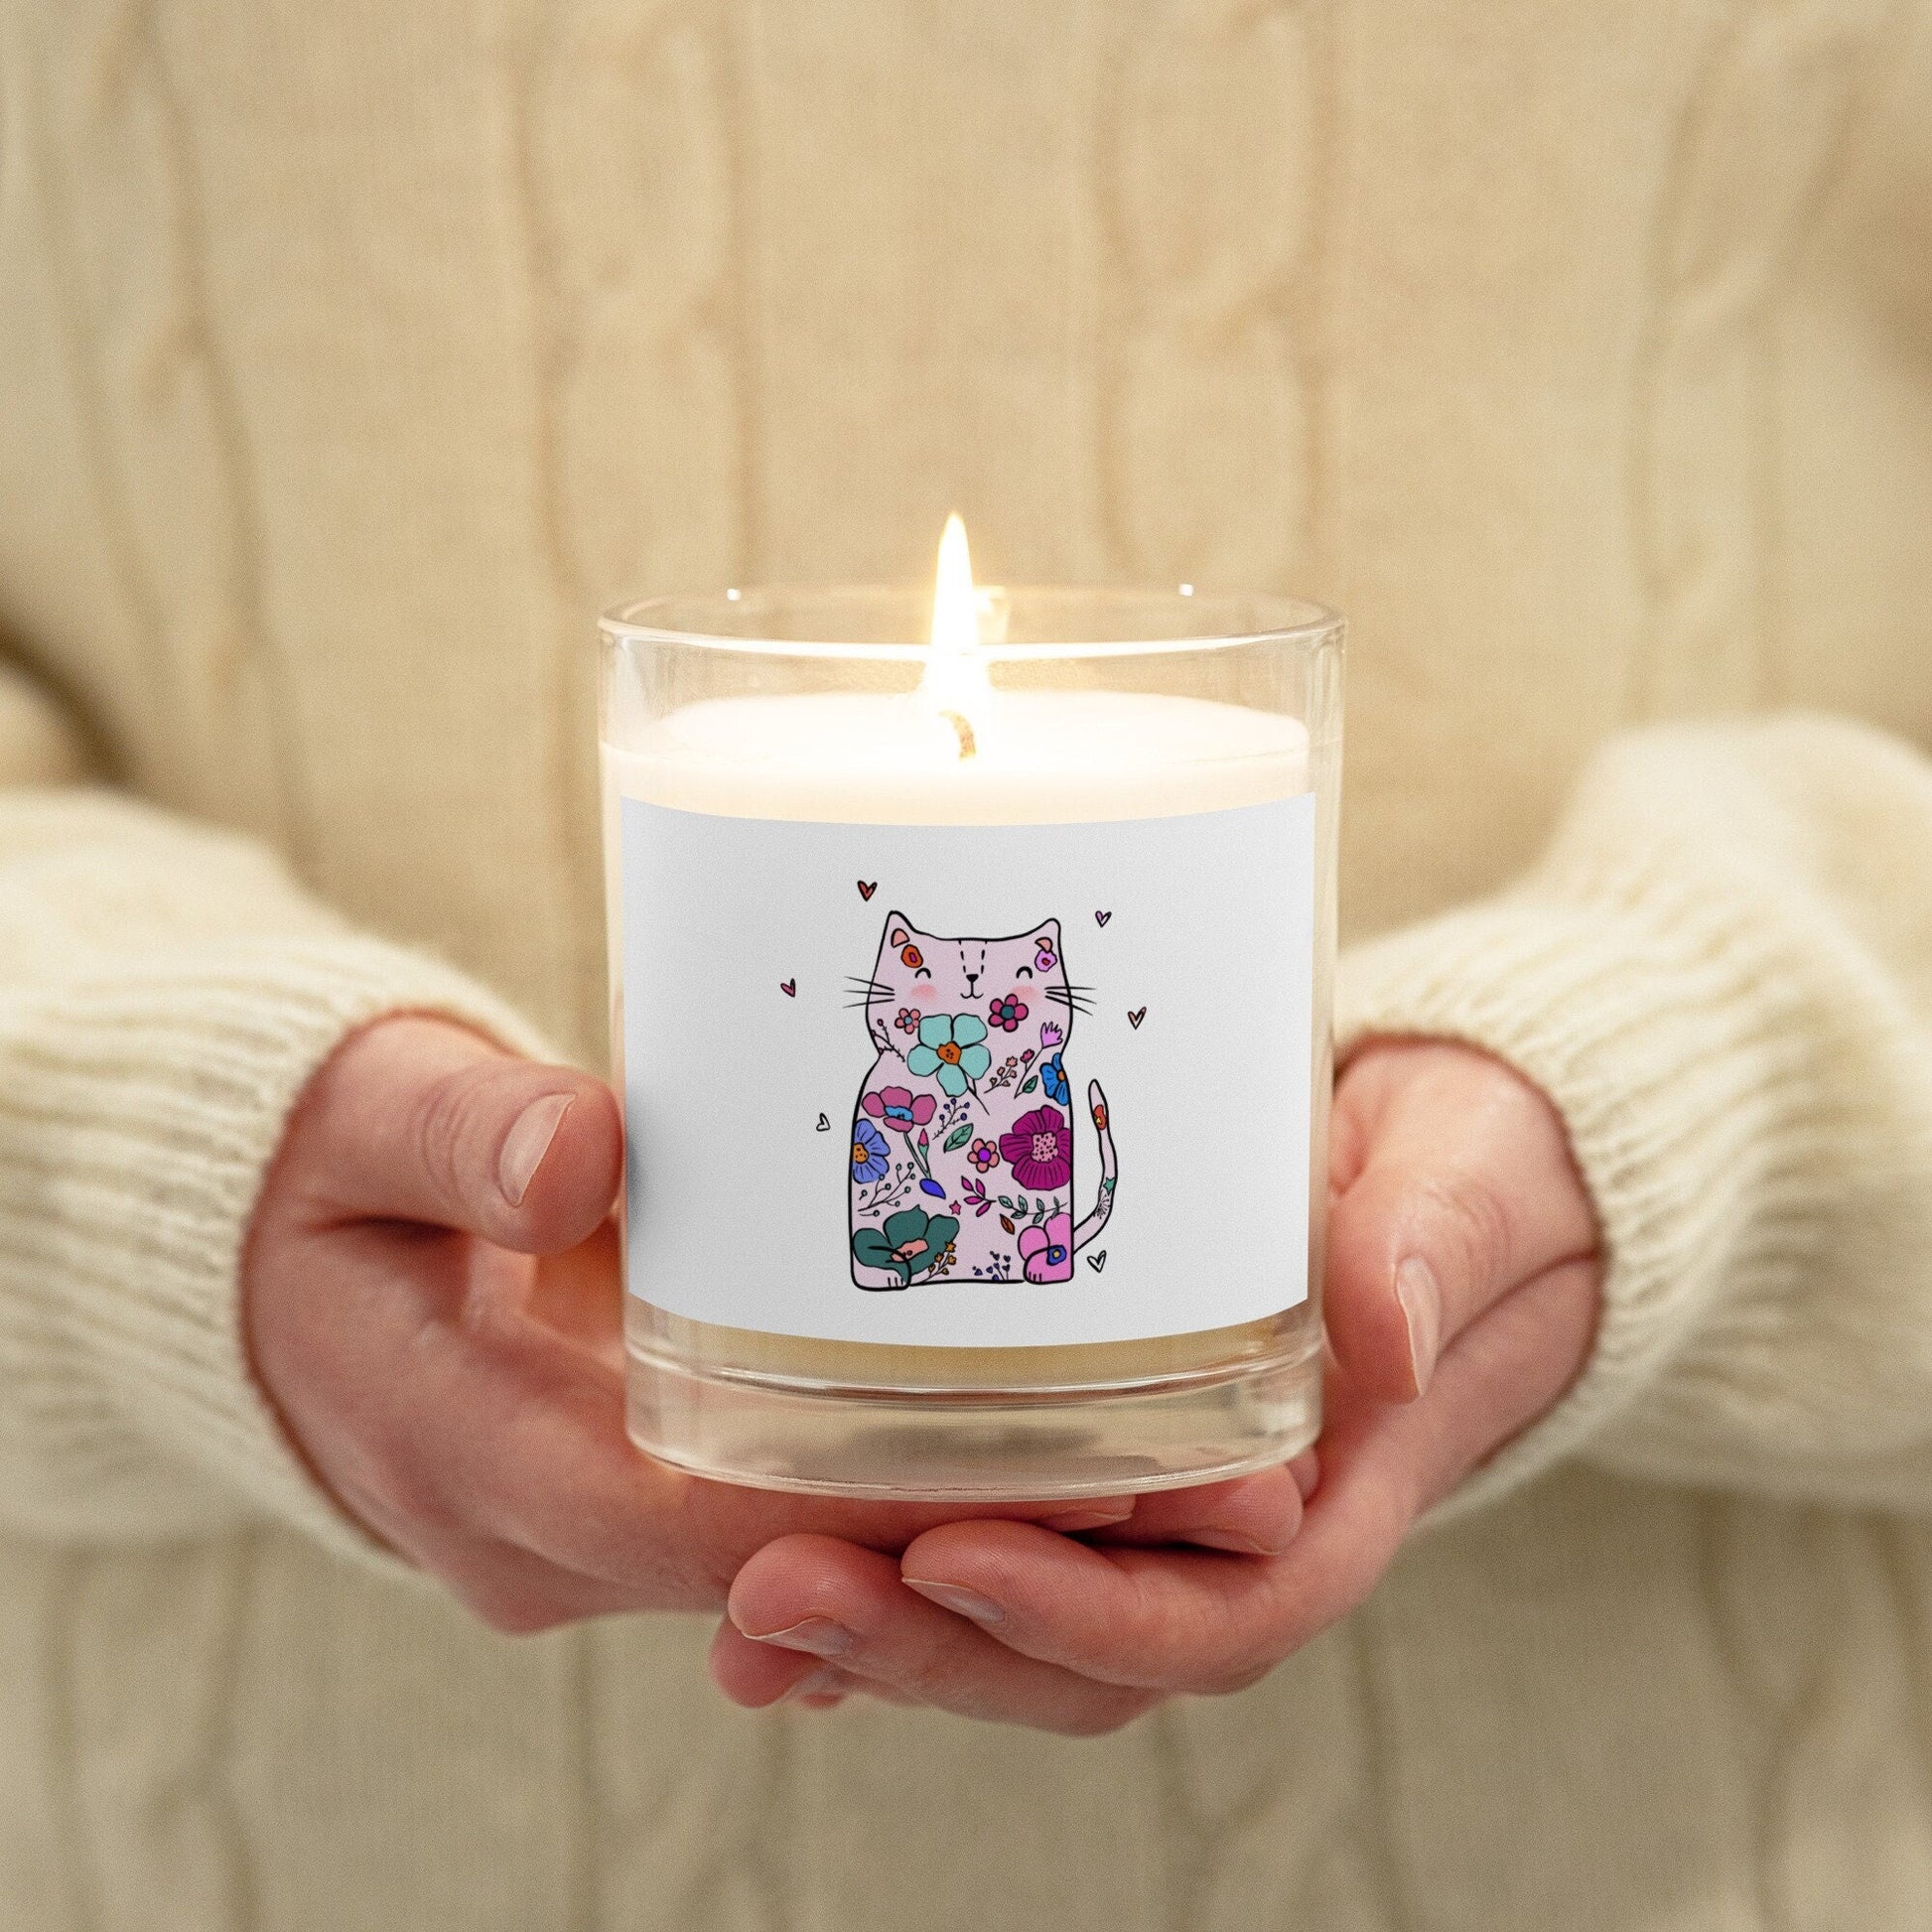 Cat Lover Gift, Cat Lover Candle, Cat Candle, Soy Candle, Soy Candles in Jar - Mardonyx Candle